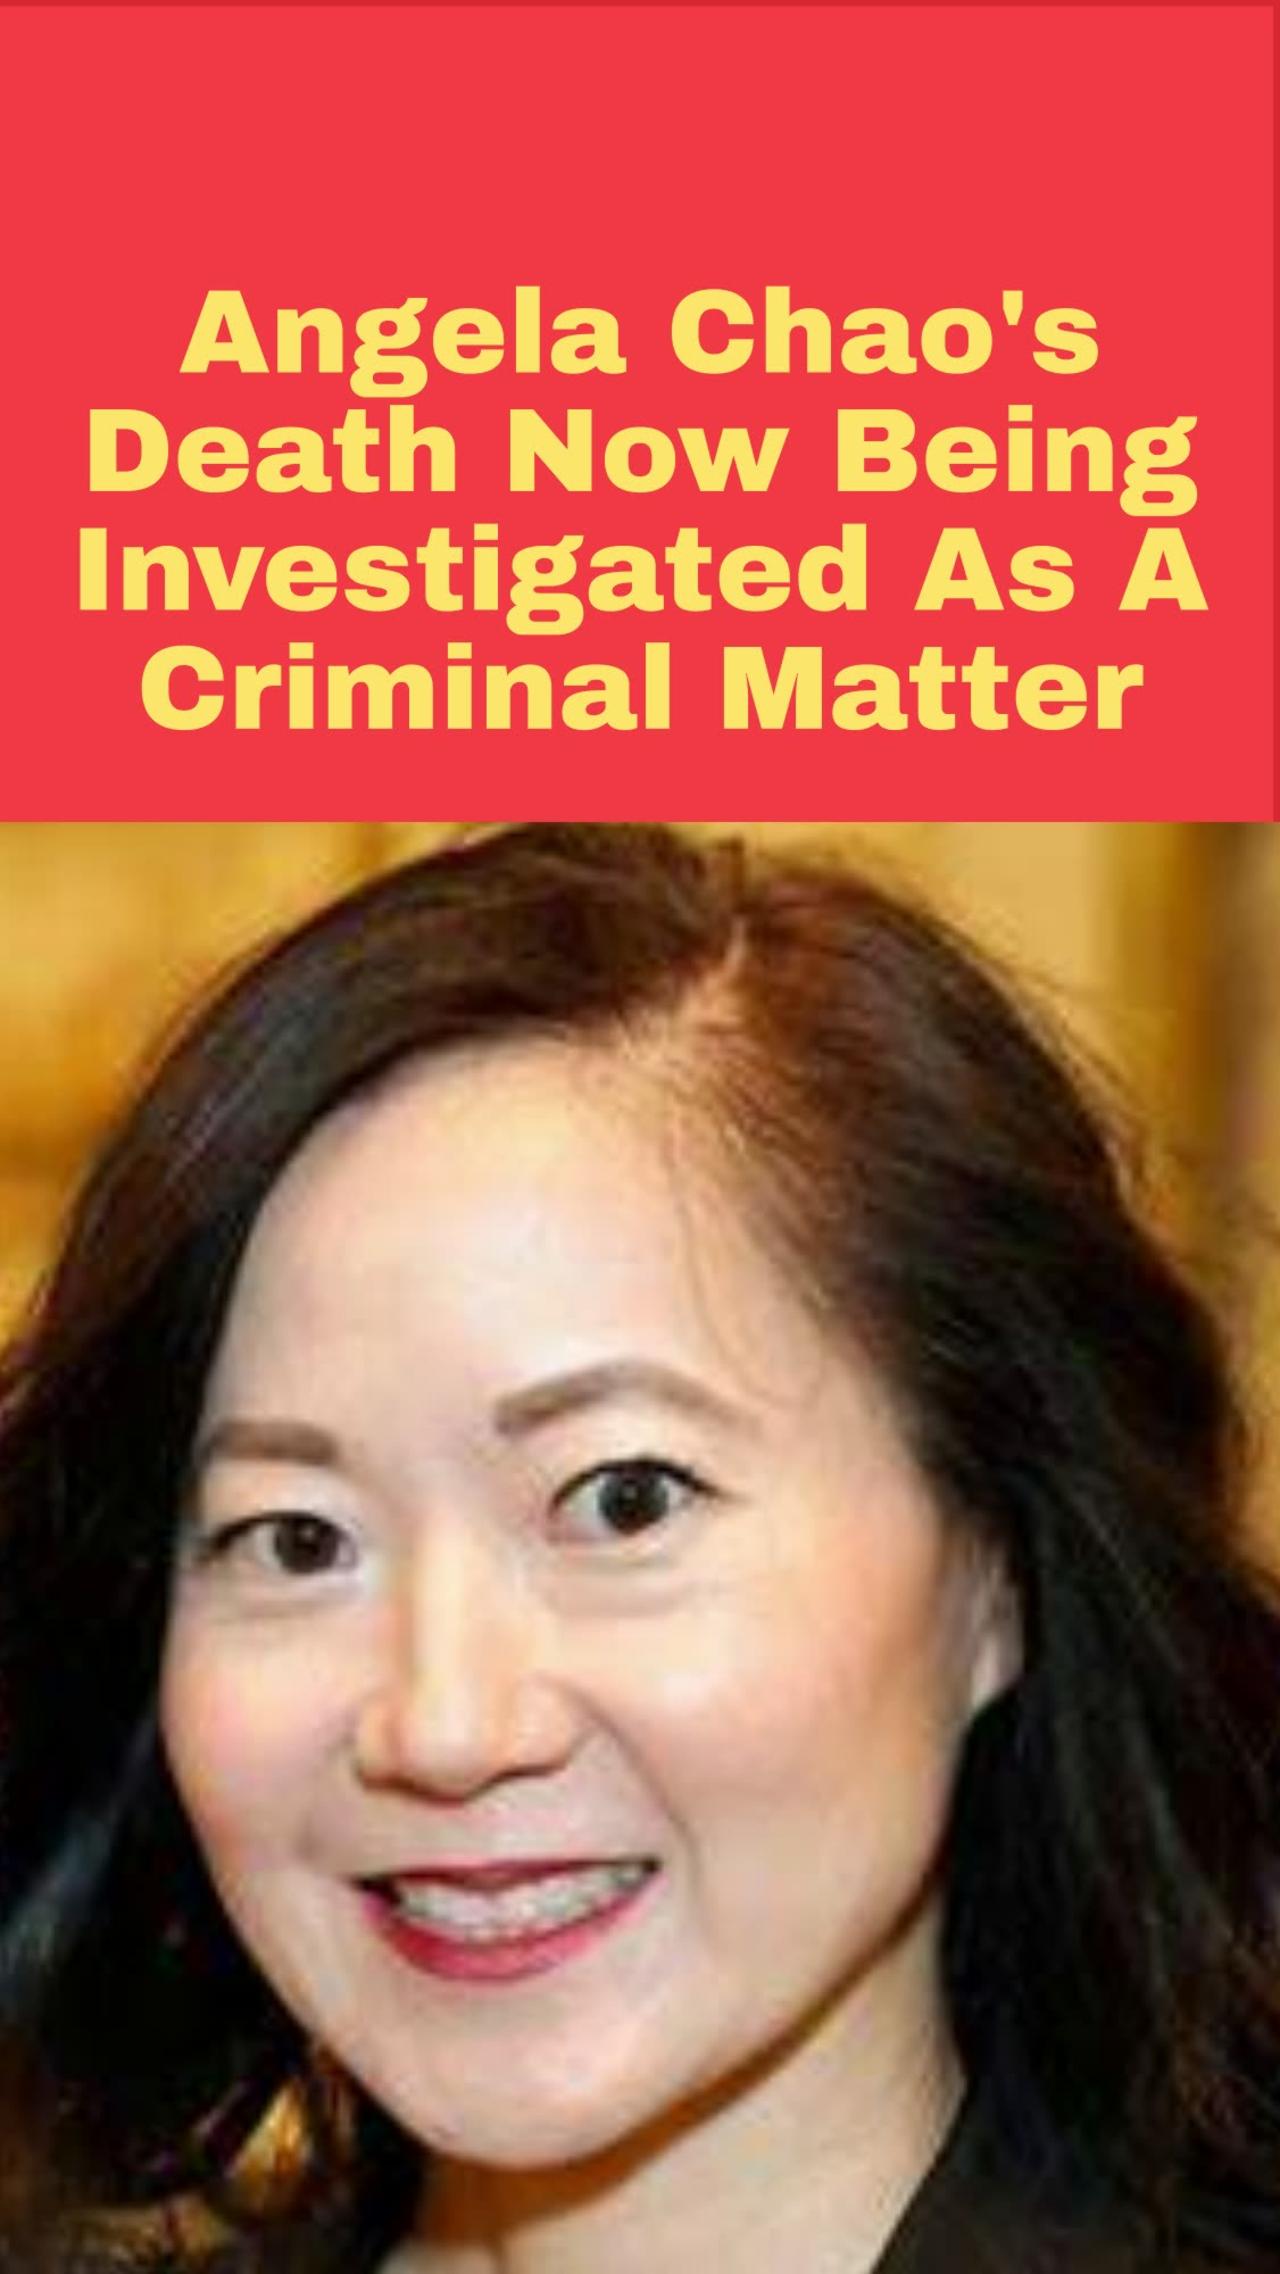 Angela Chao's Death Now Being Investigated As A Criminal Matter